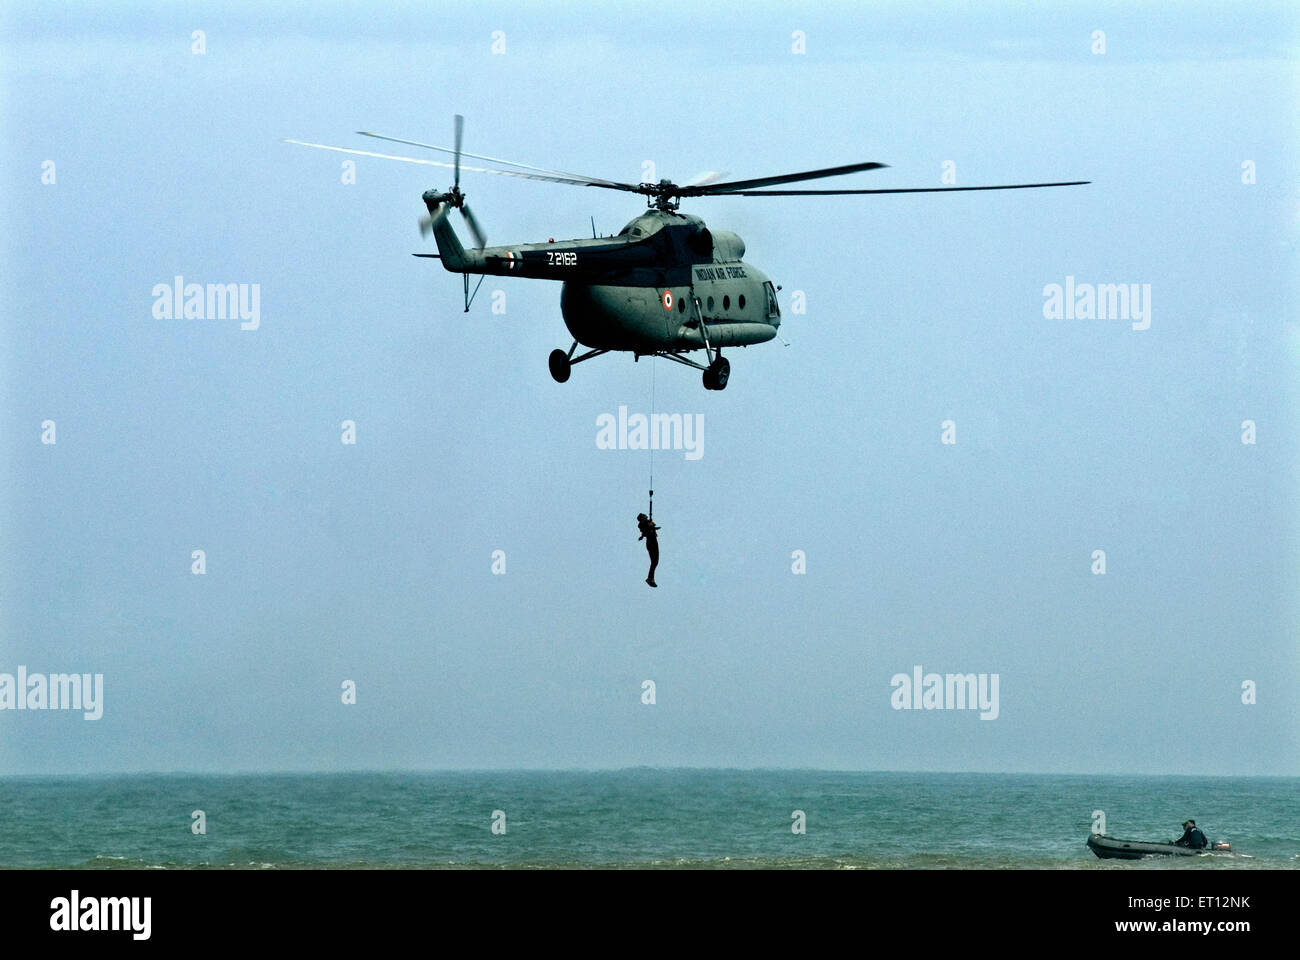 Rescue operations at sea by Air Force men using helicopter on Air Force Day Shanghumugom beach Trivandrum kerala india Stock Photo